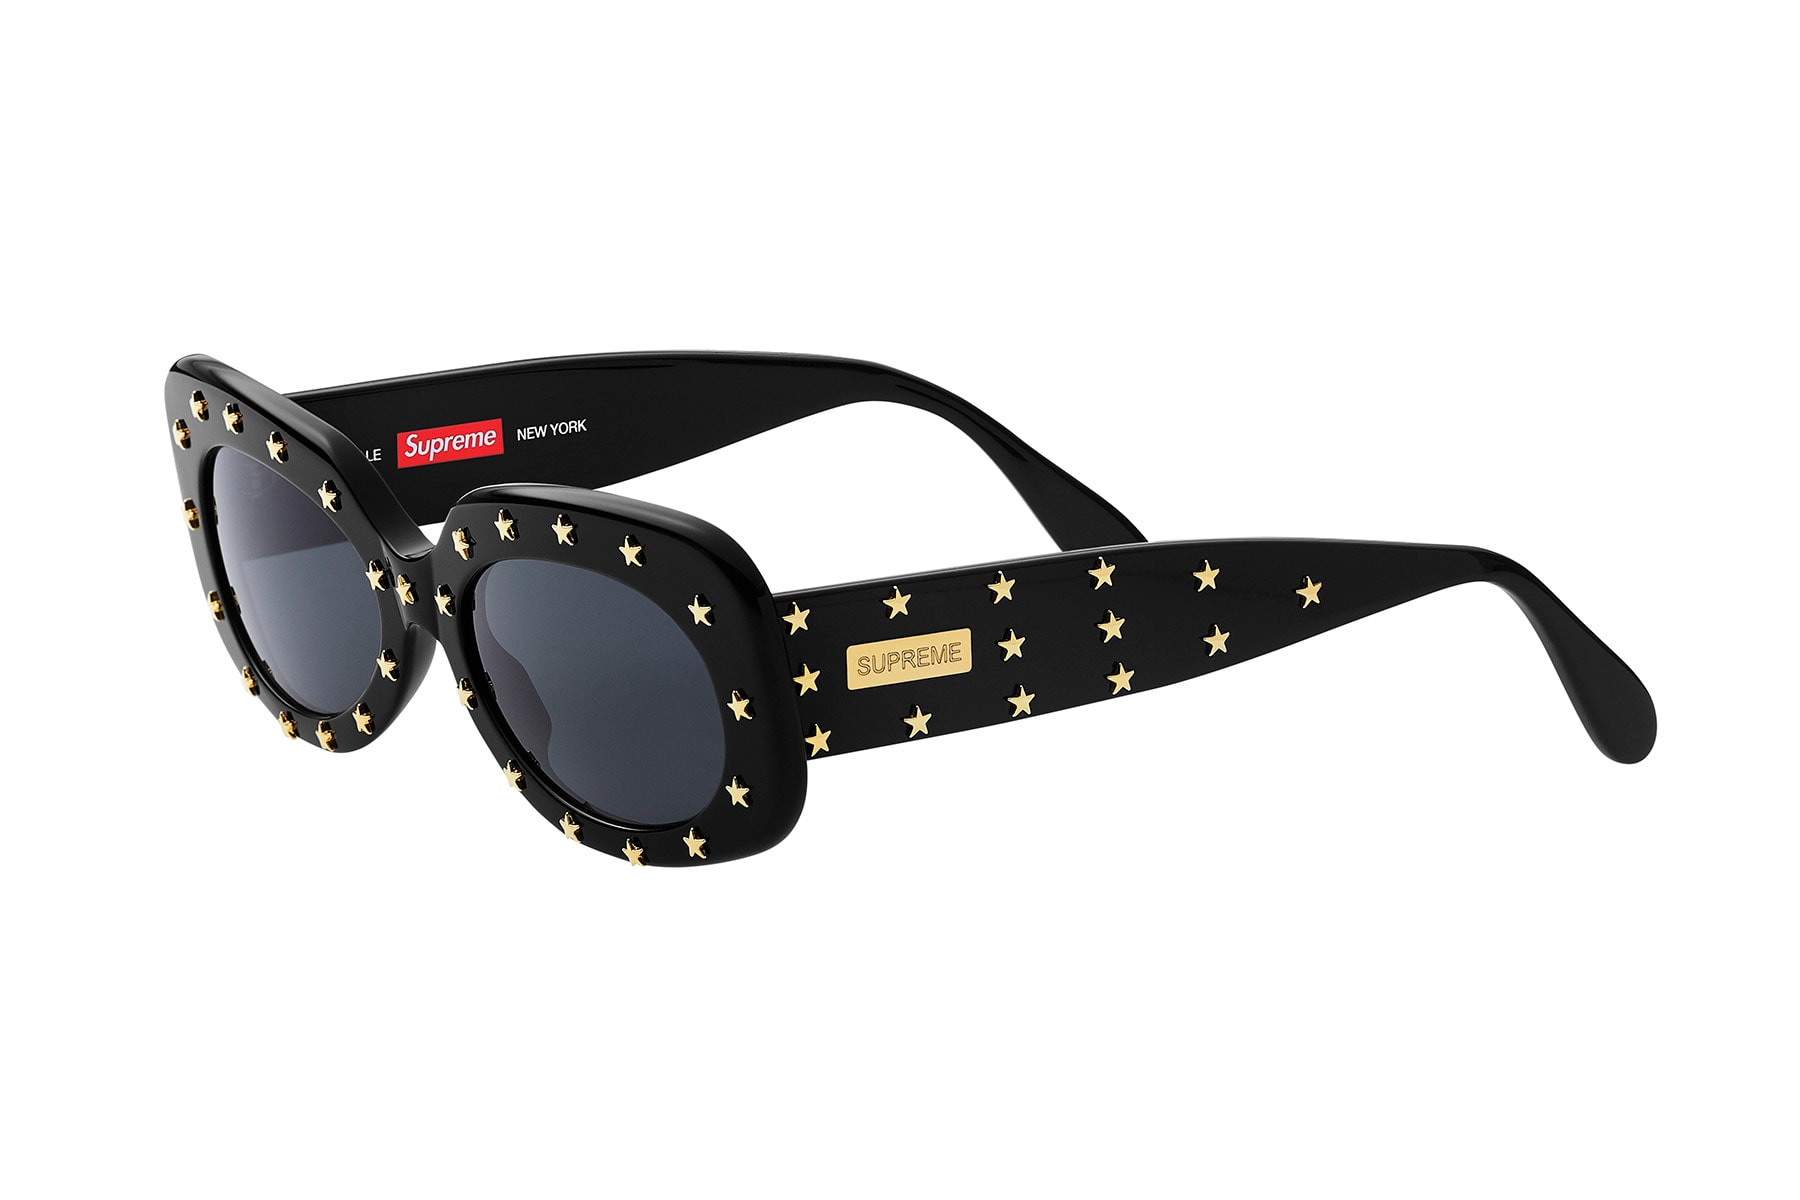 Supreme Spring Sunglasses Shades Drop Plaza Royale Exit Astro Booker Streetwear Street Style Rare